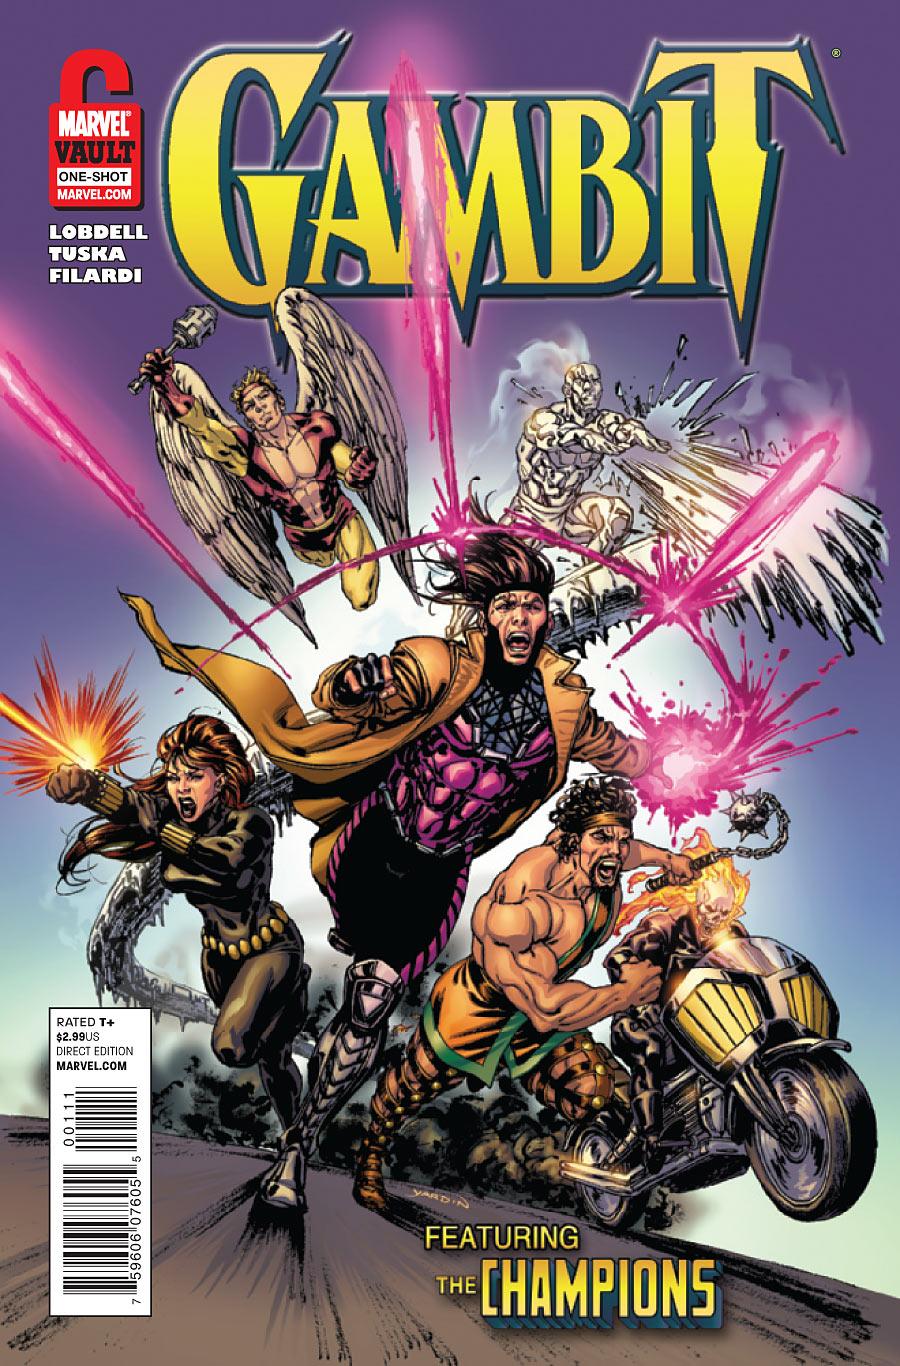 Gambit: From the Marvel Vault Vol. 1 #1